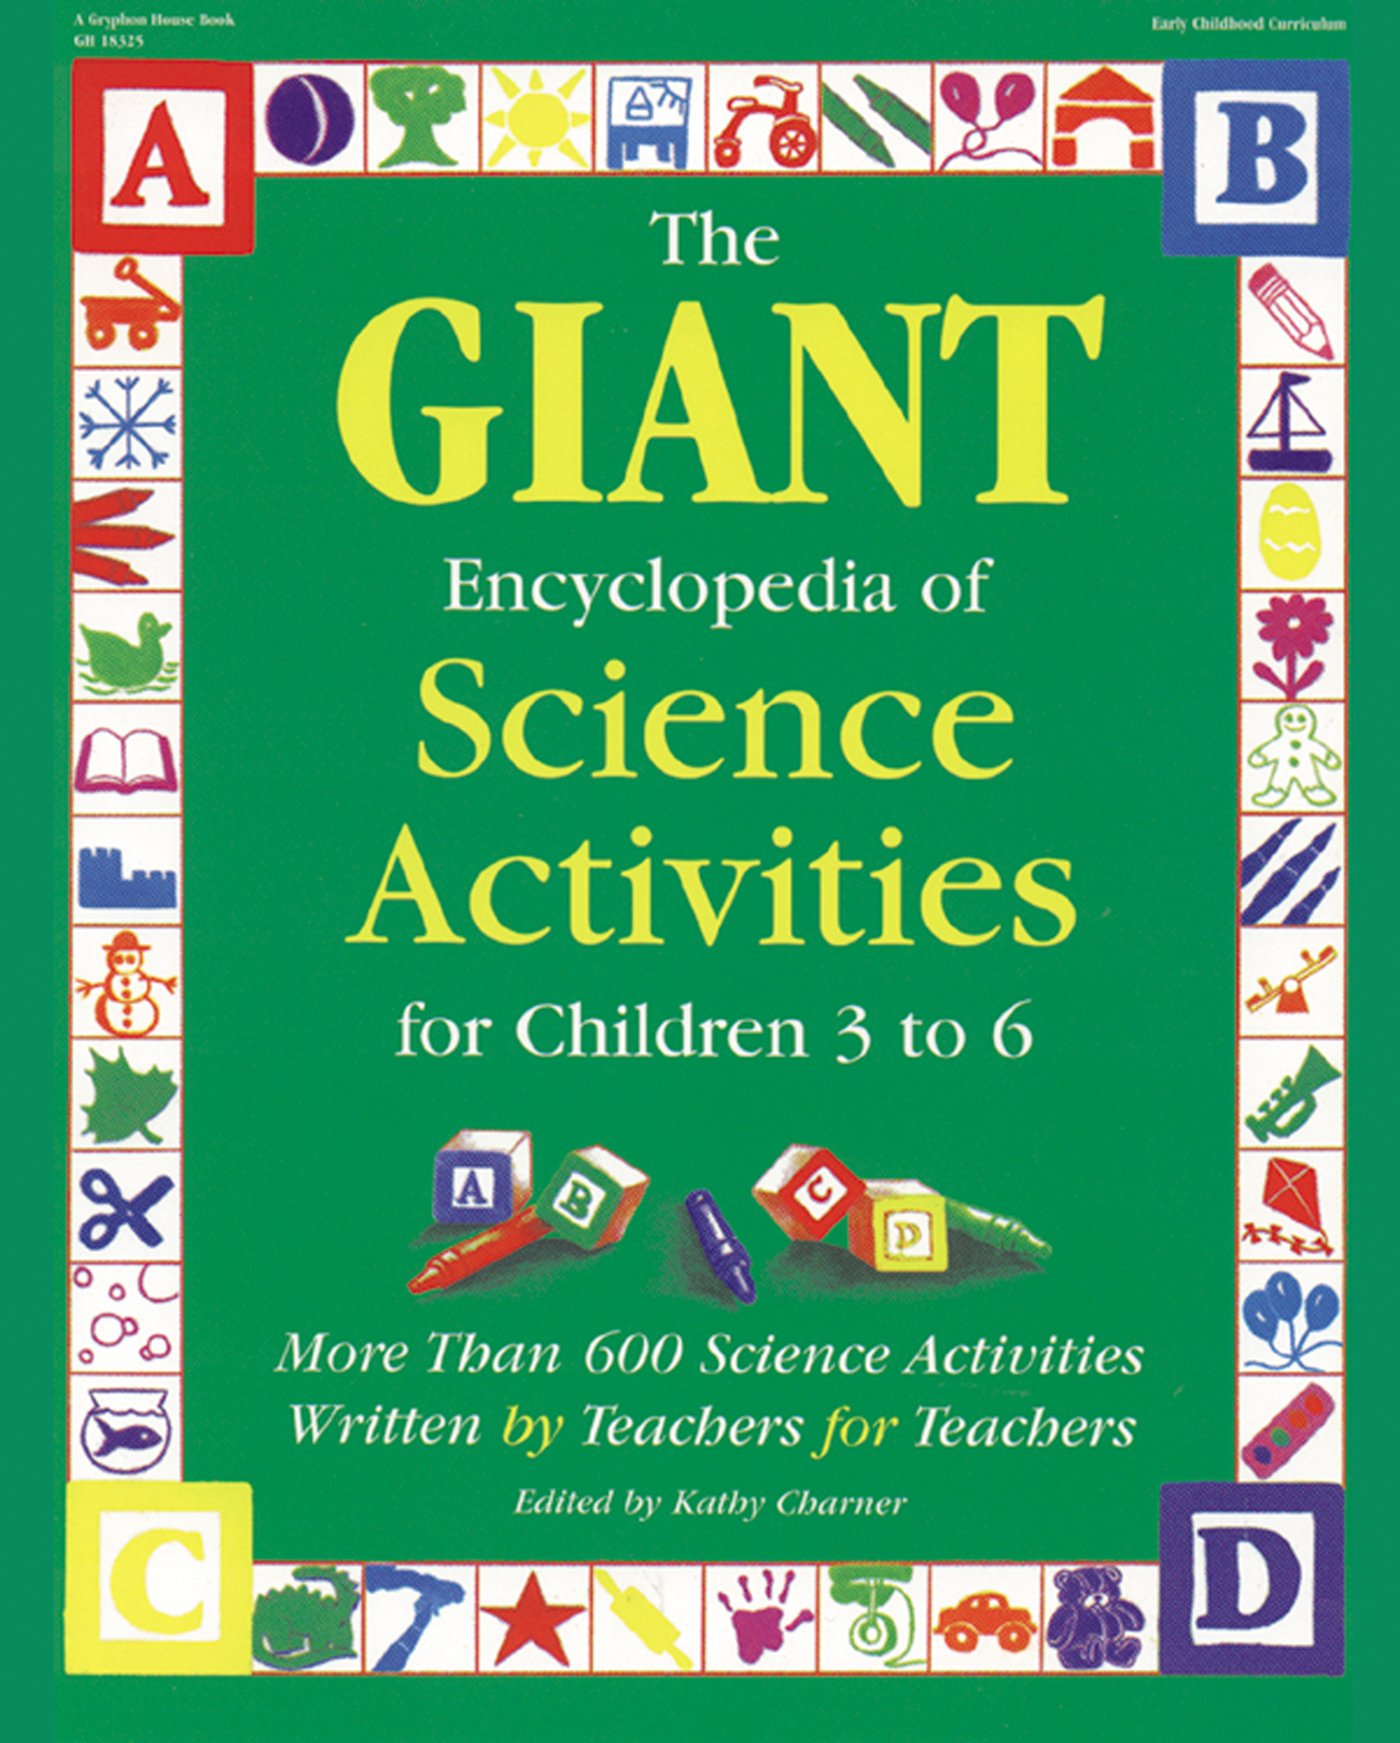 The GIANT Encyclopedia of Science Activities for Children 3 to 6